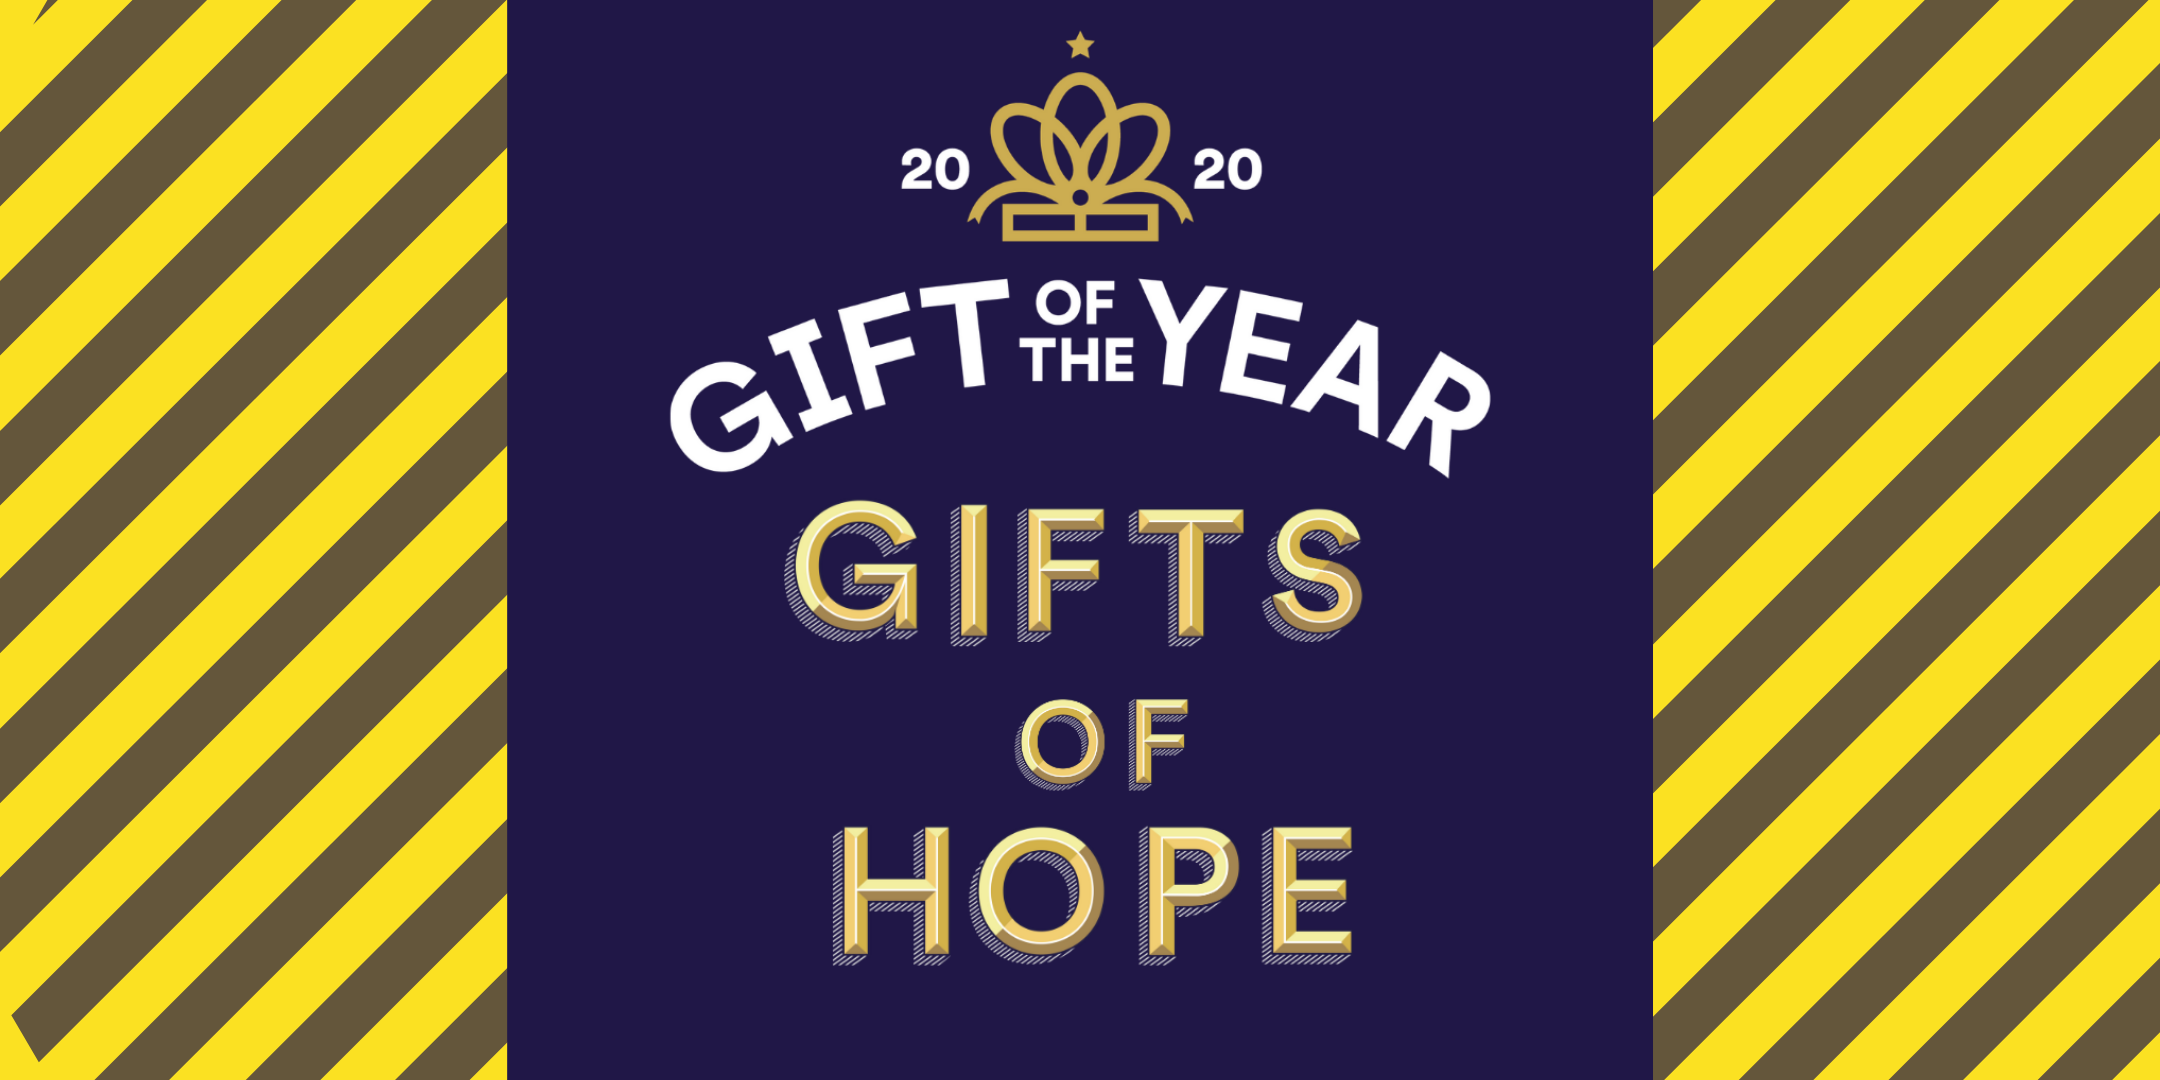 Gift Of The Year Invites Entries For A New ‘Gifts Of Hope’ Award